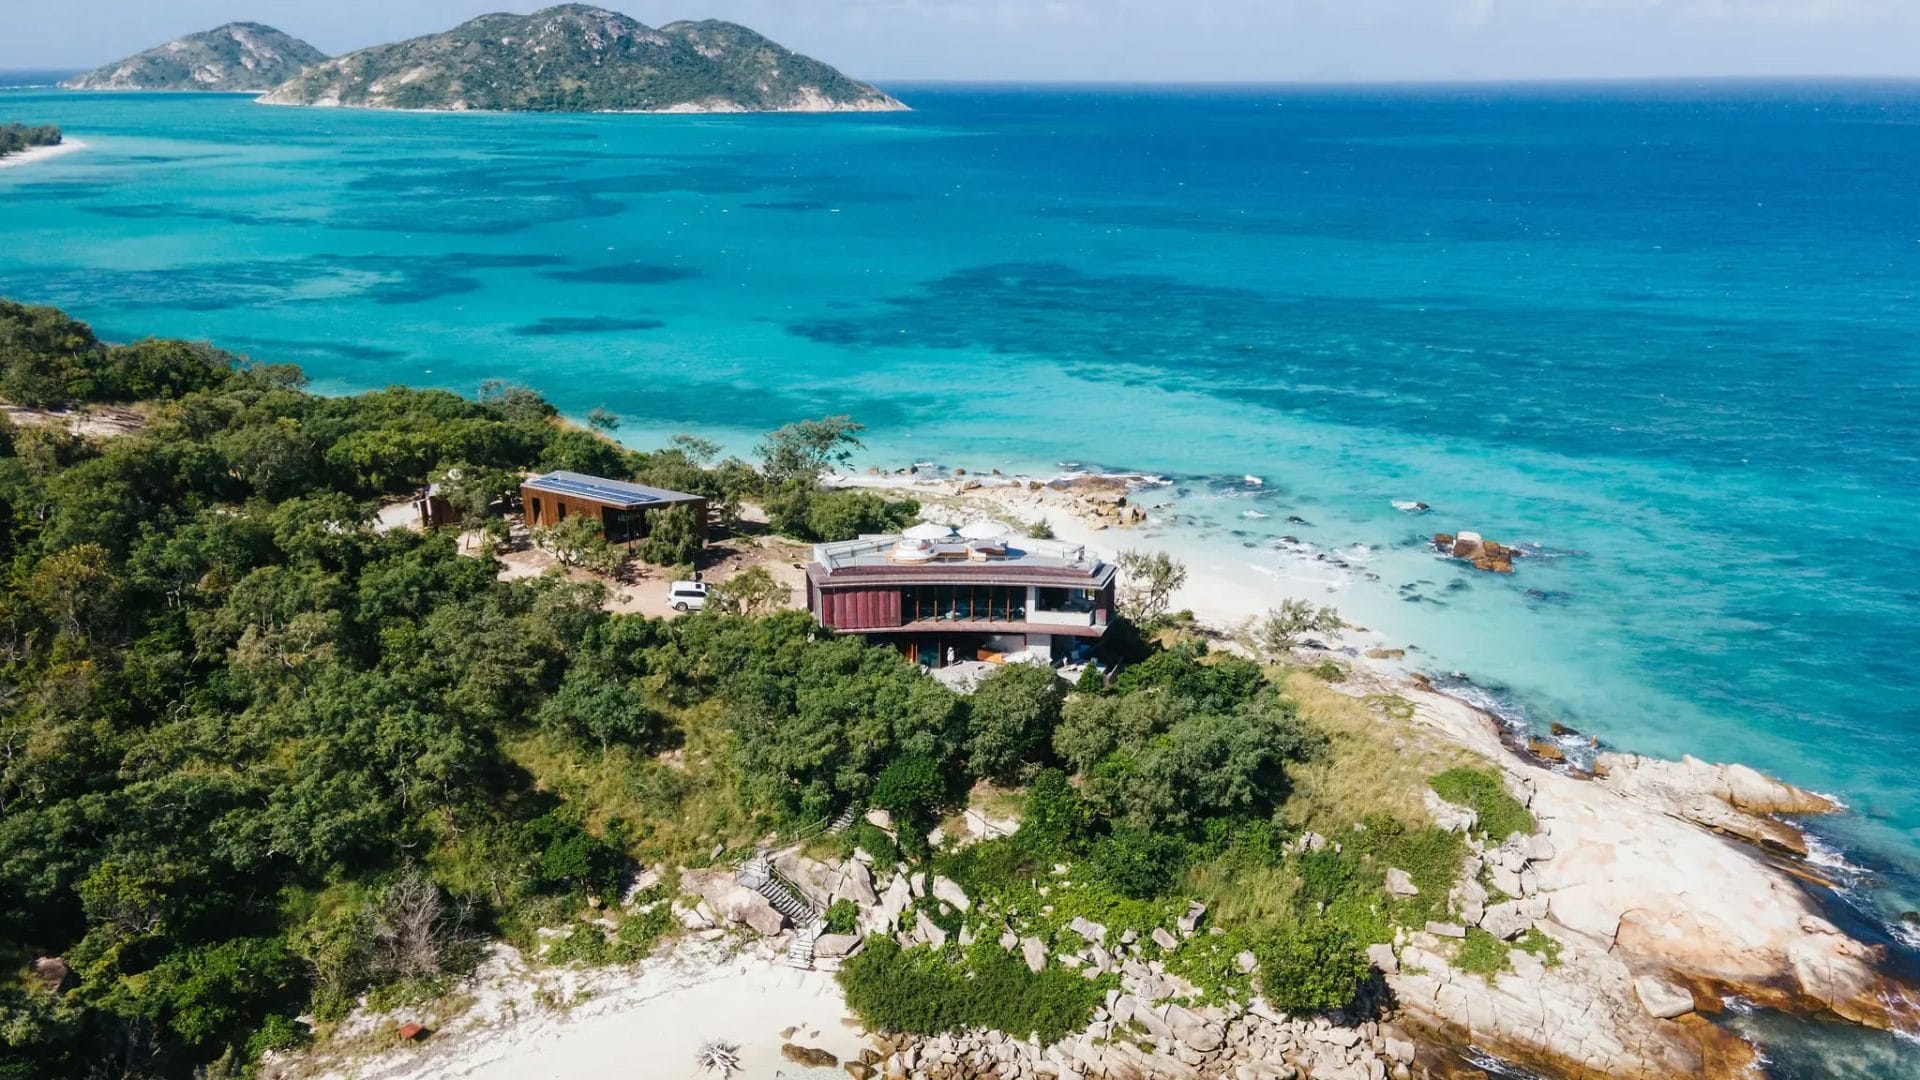 Exterior aerial of the remote House at Lizard Island amongst green bushland, white sand beaches and blue ocean